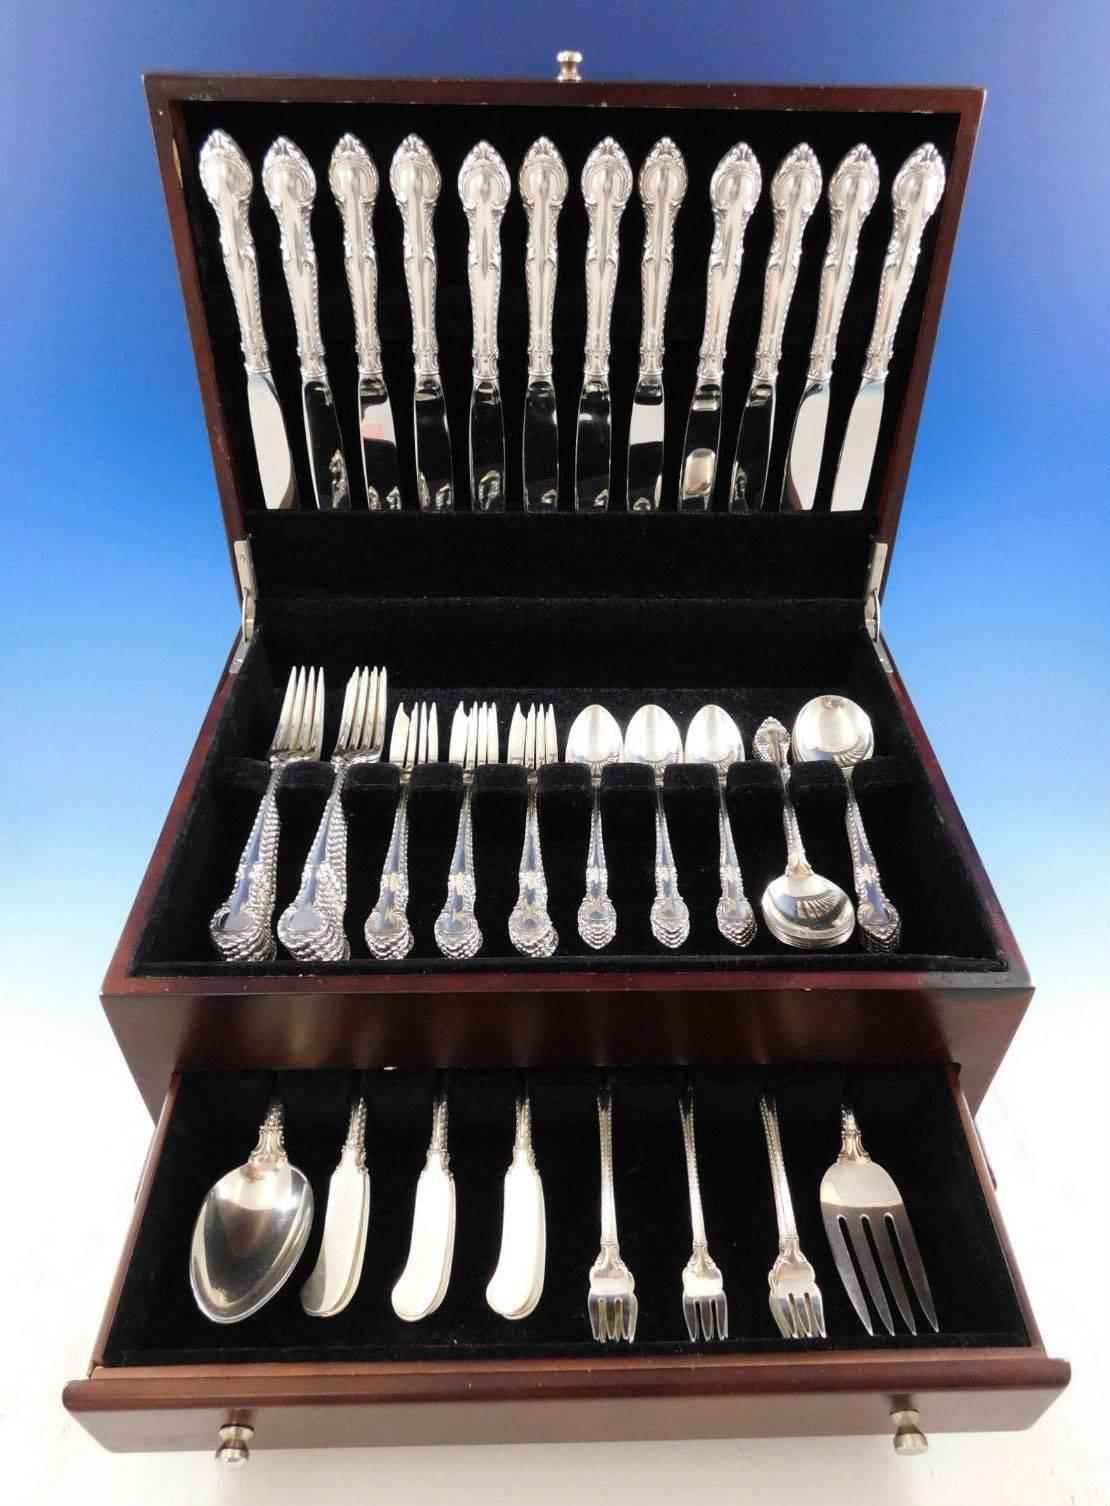 Dinner Size English Gadroon by Gorham sterling silver Flatware set, 87 pieces. This set includes: 

12 Dinner Size Knives, 9 5/8